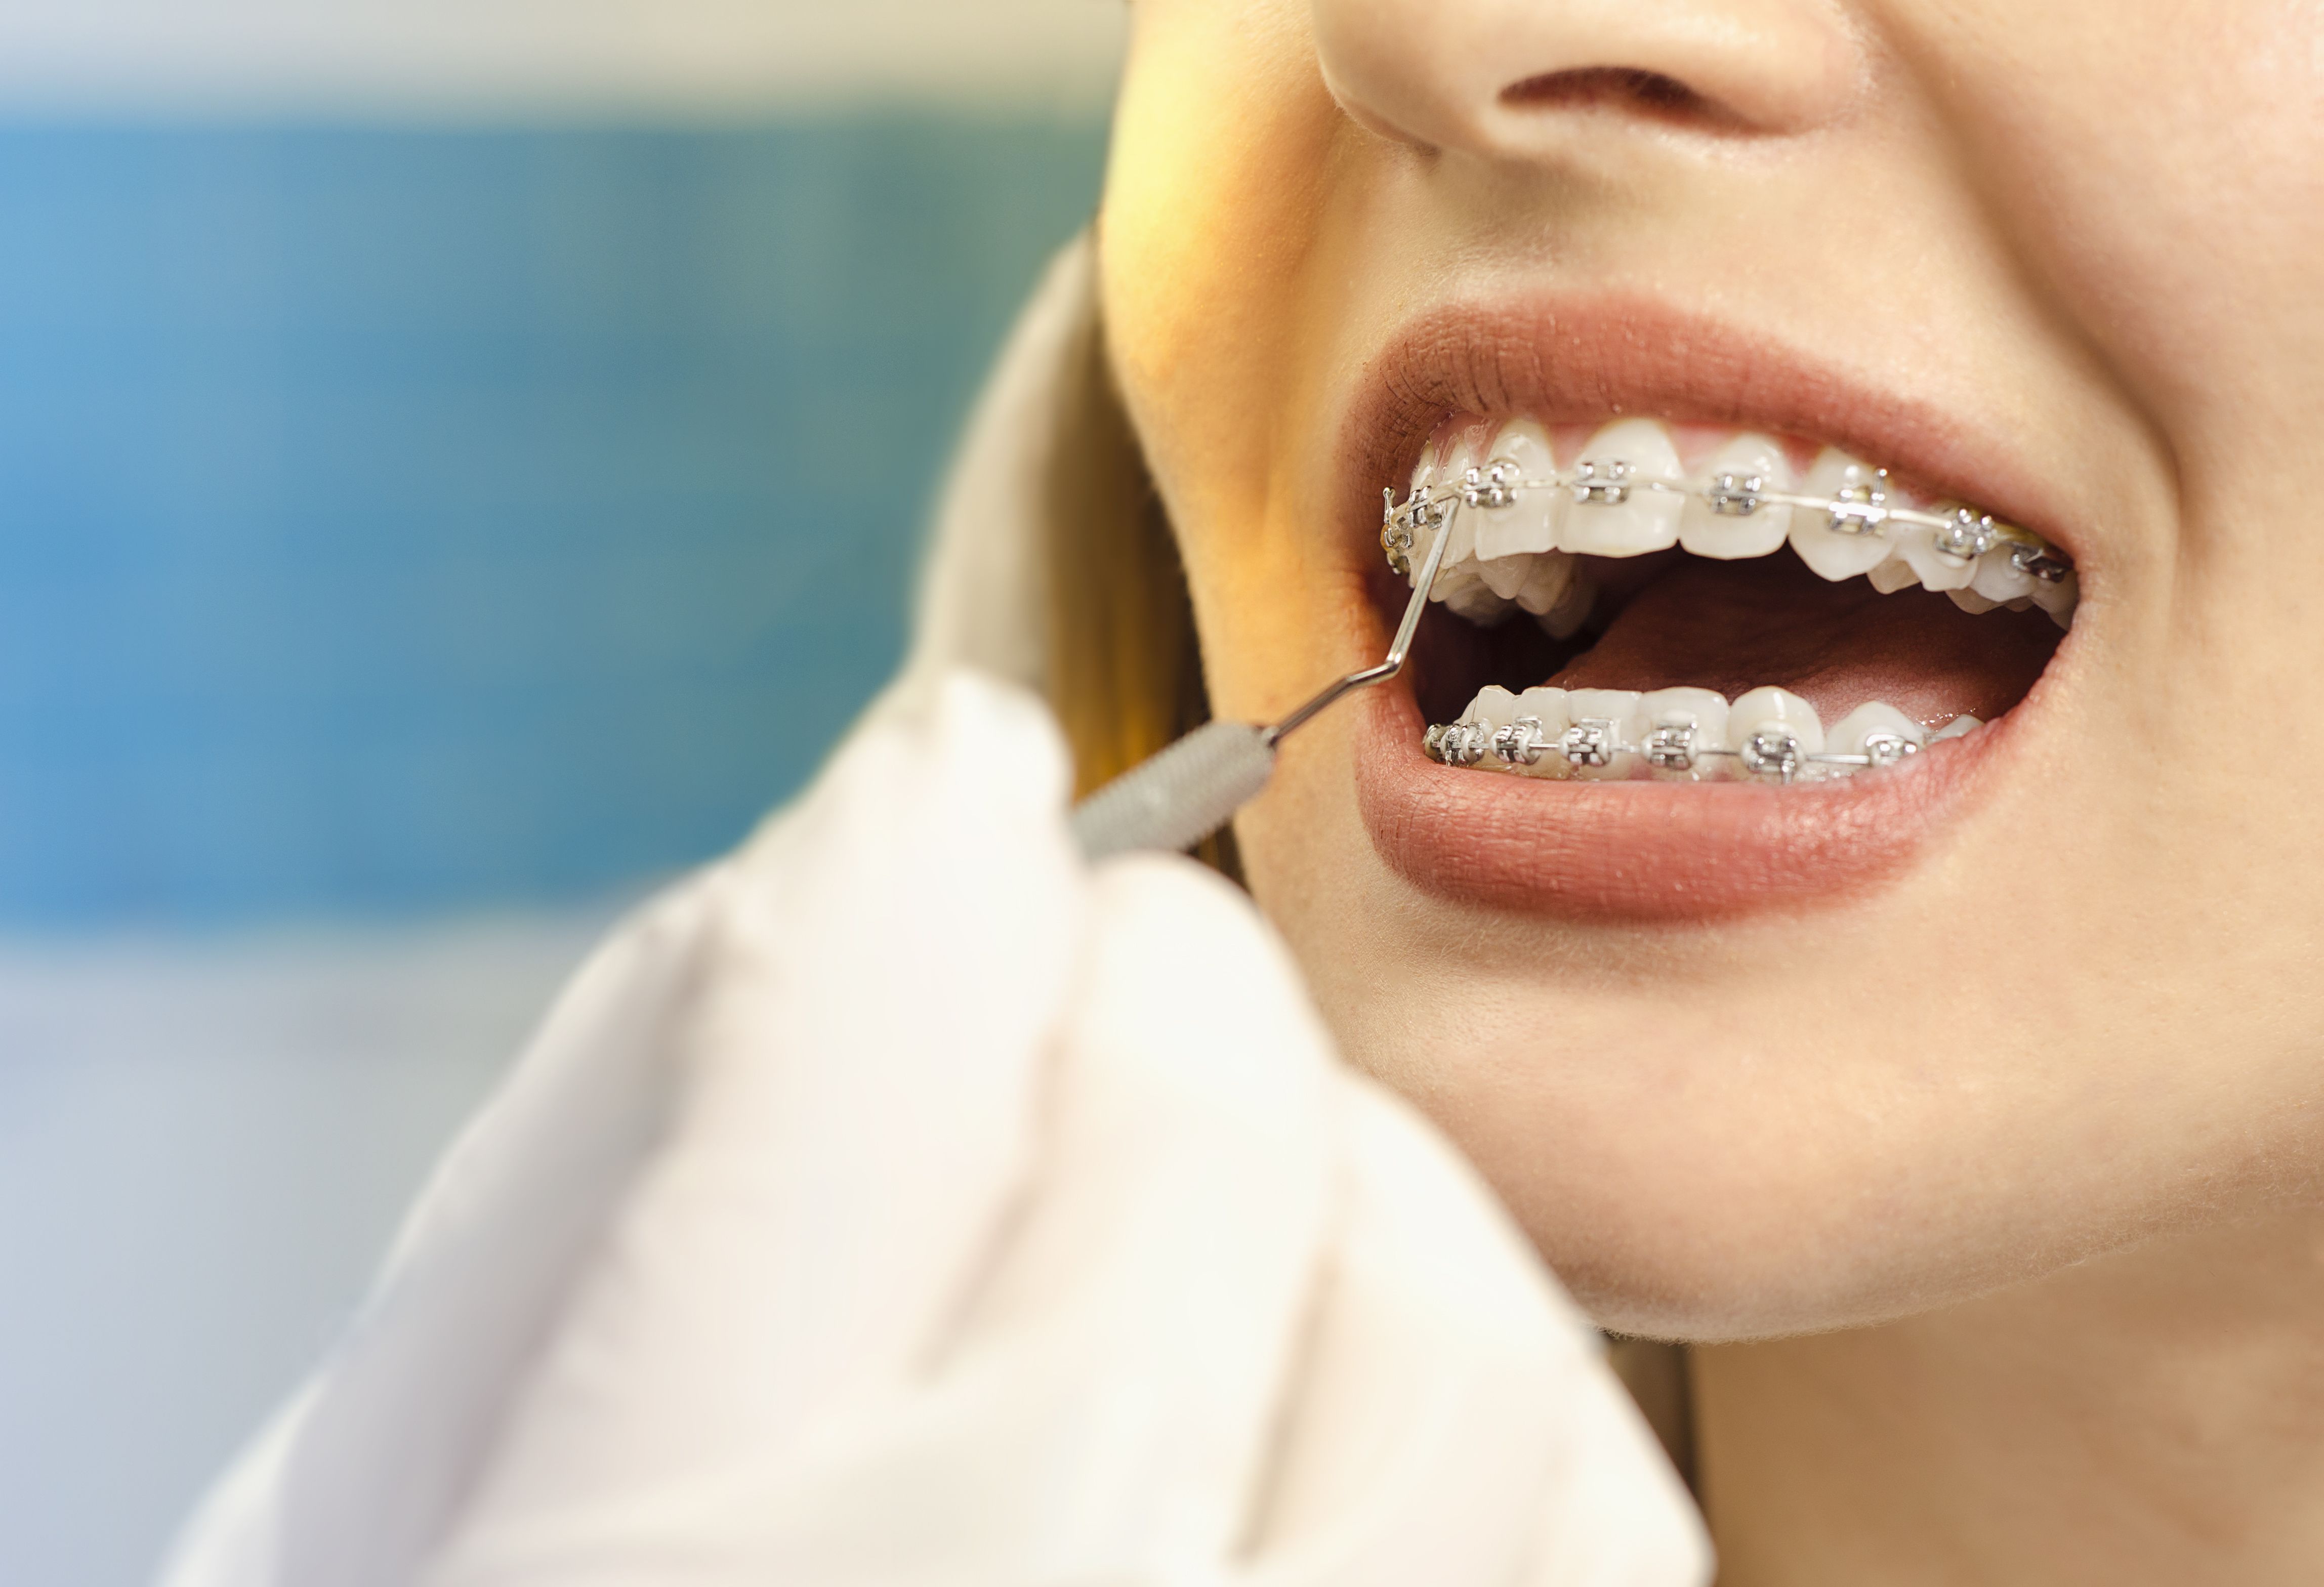 The Different Types of Dental Braces